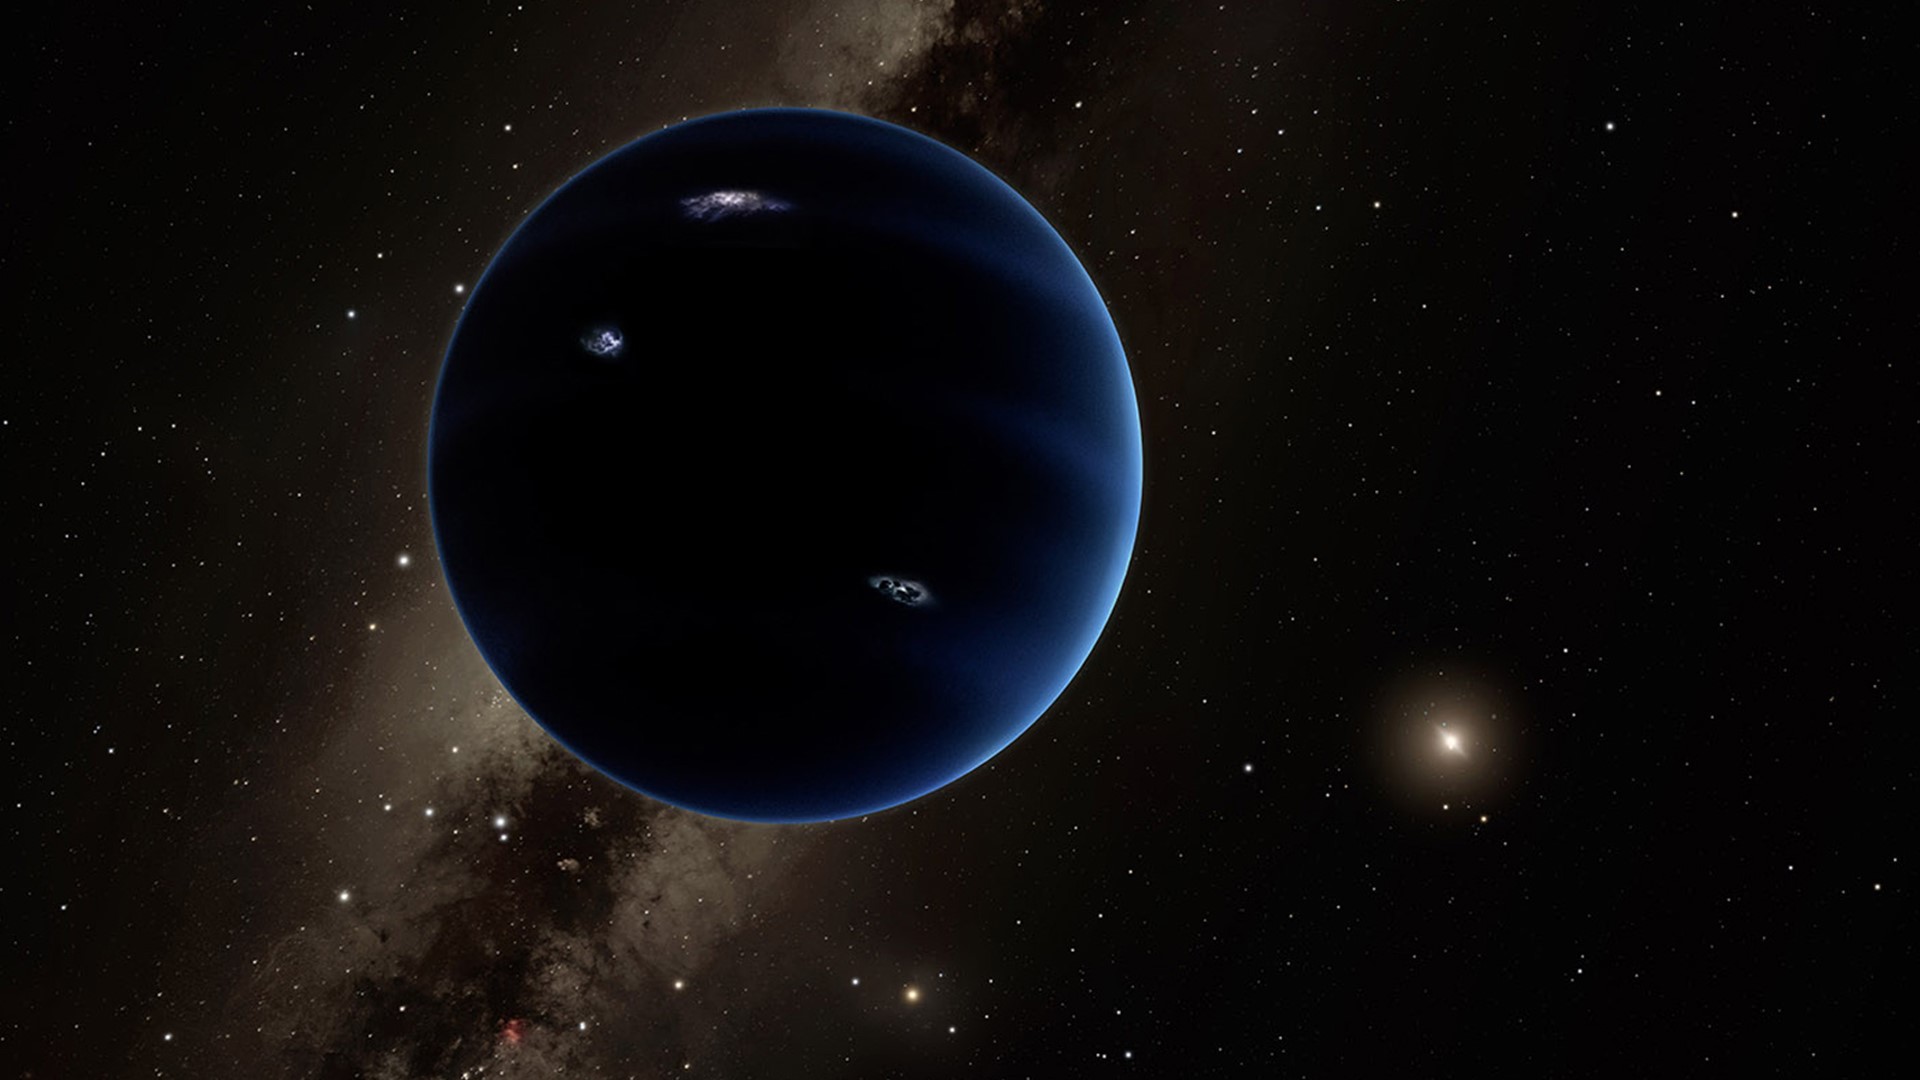 New evidence suggests an unknown body is lurking in the outskirts of the solar system.